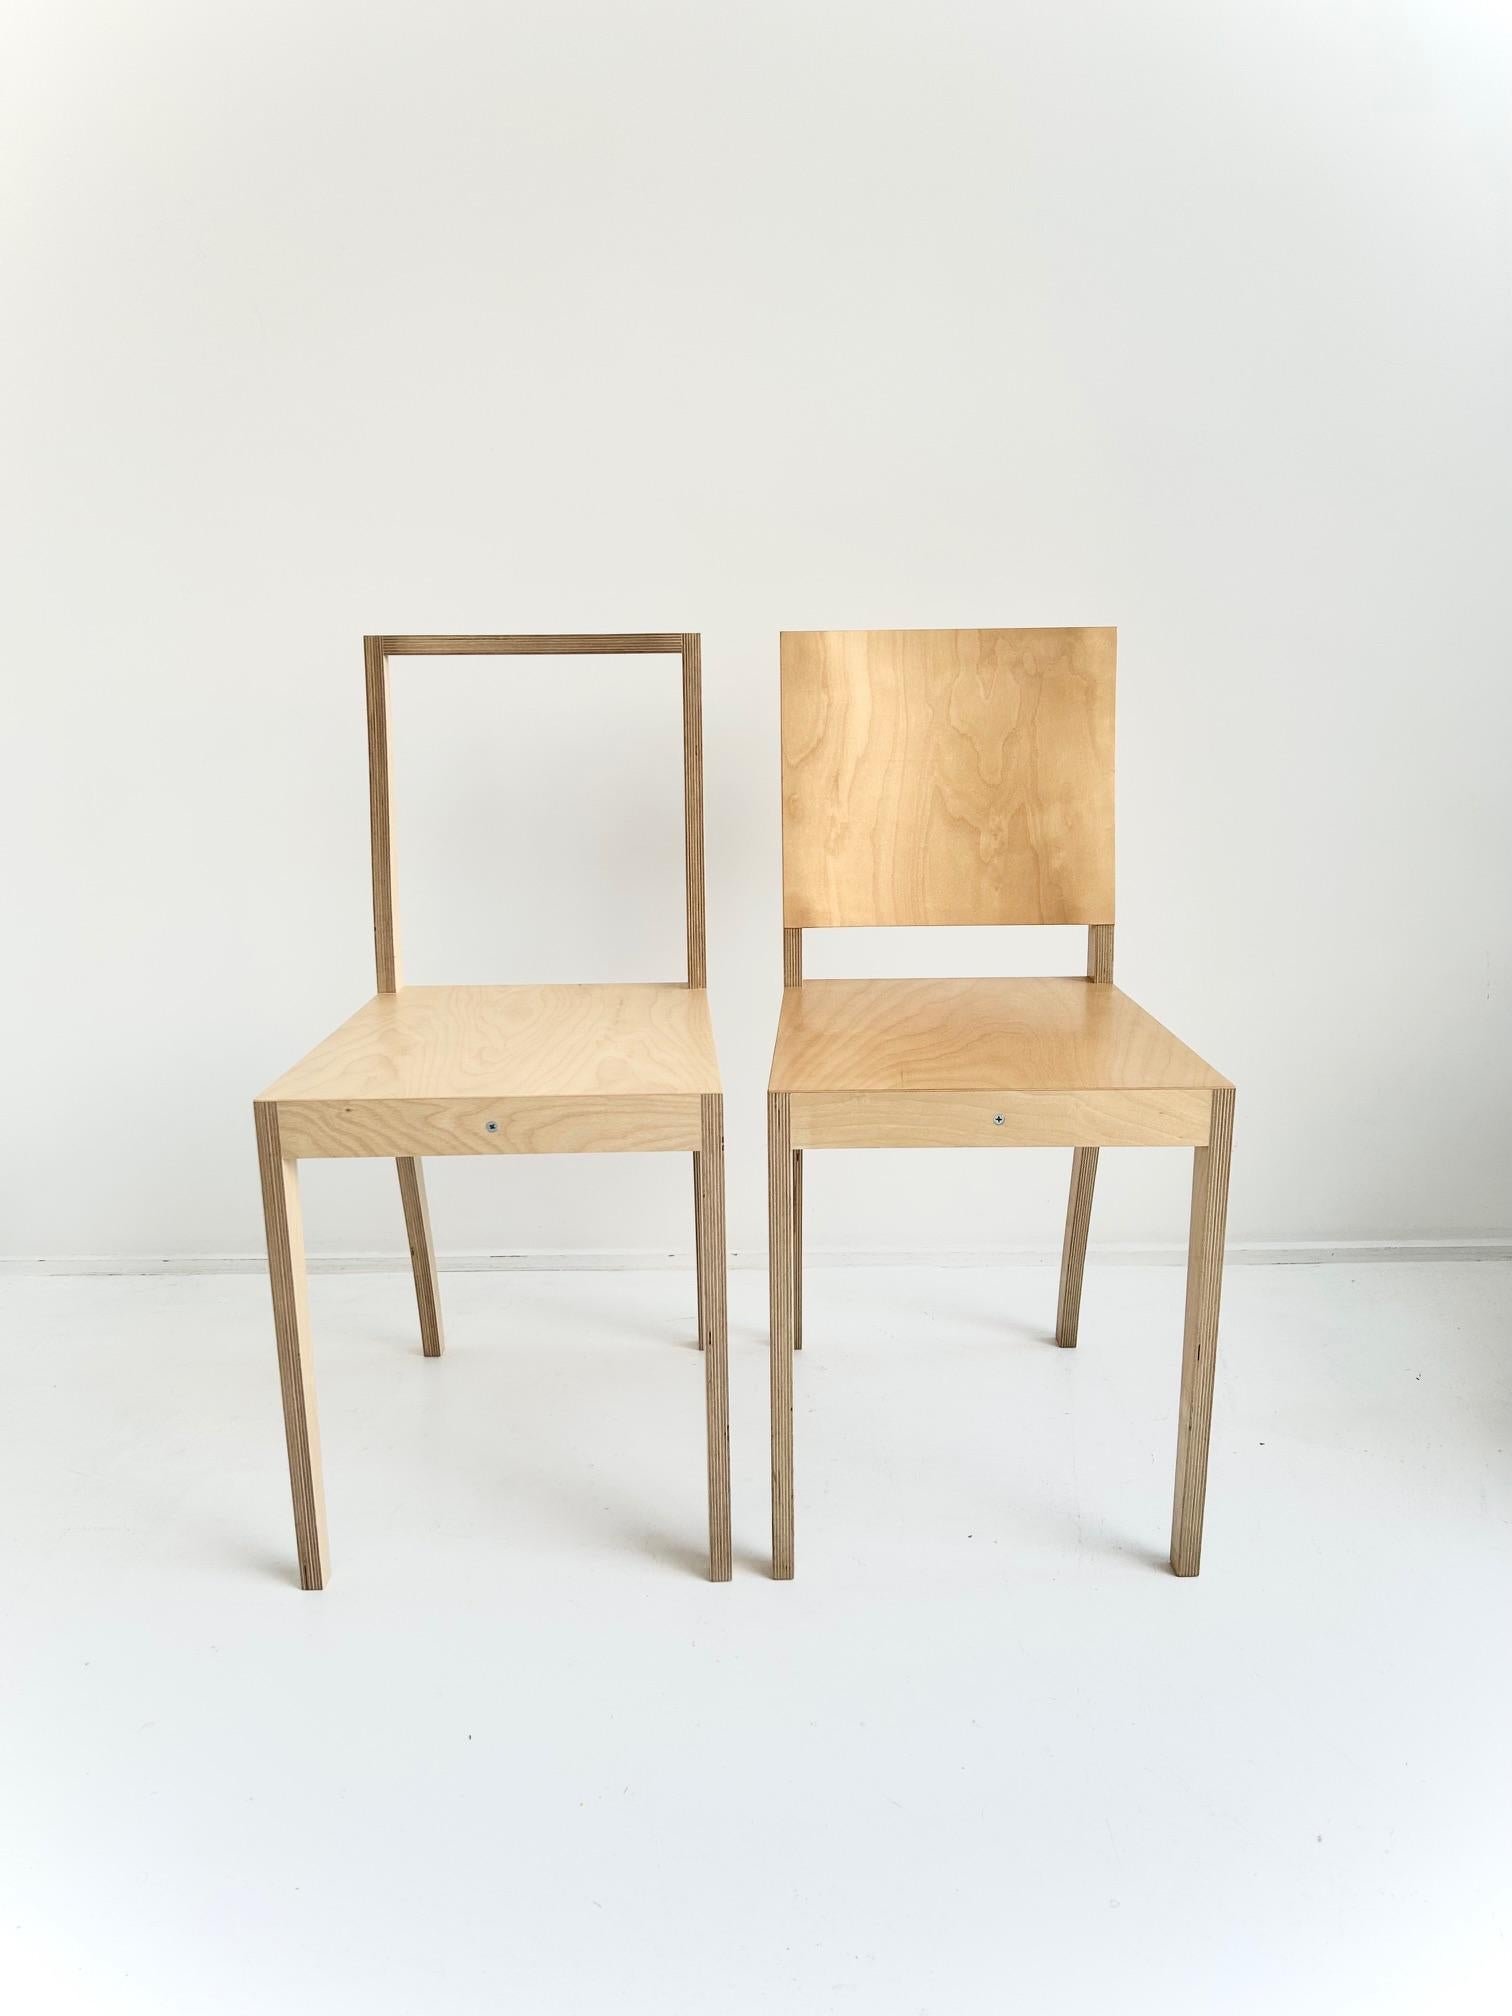 Pair of “Plywood” chairs by Jasper Morrison, Vitra, 1988

Vitra Edition
United Kingdom, 1988
Plywood
Vitra label under the seat
Excellent condition.
H. 84 x L. 39 x D. 46 cm

Model designed for the exhibition “Some New Items for the Home, Part I” at